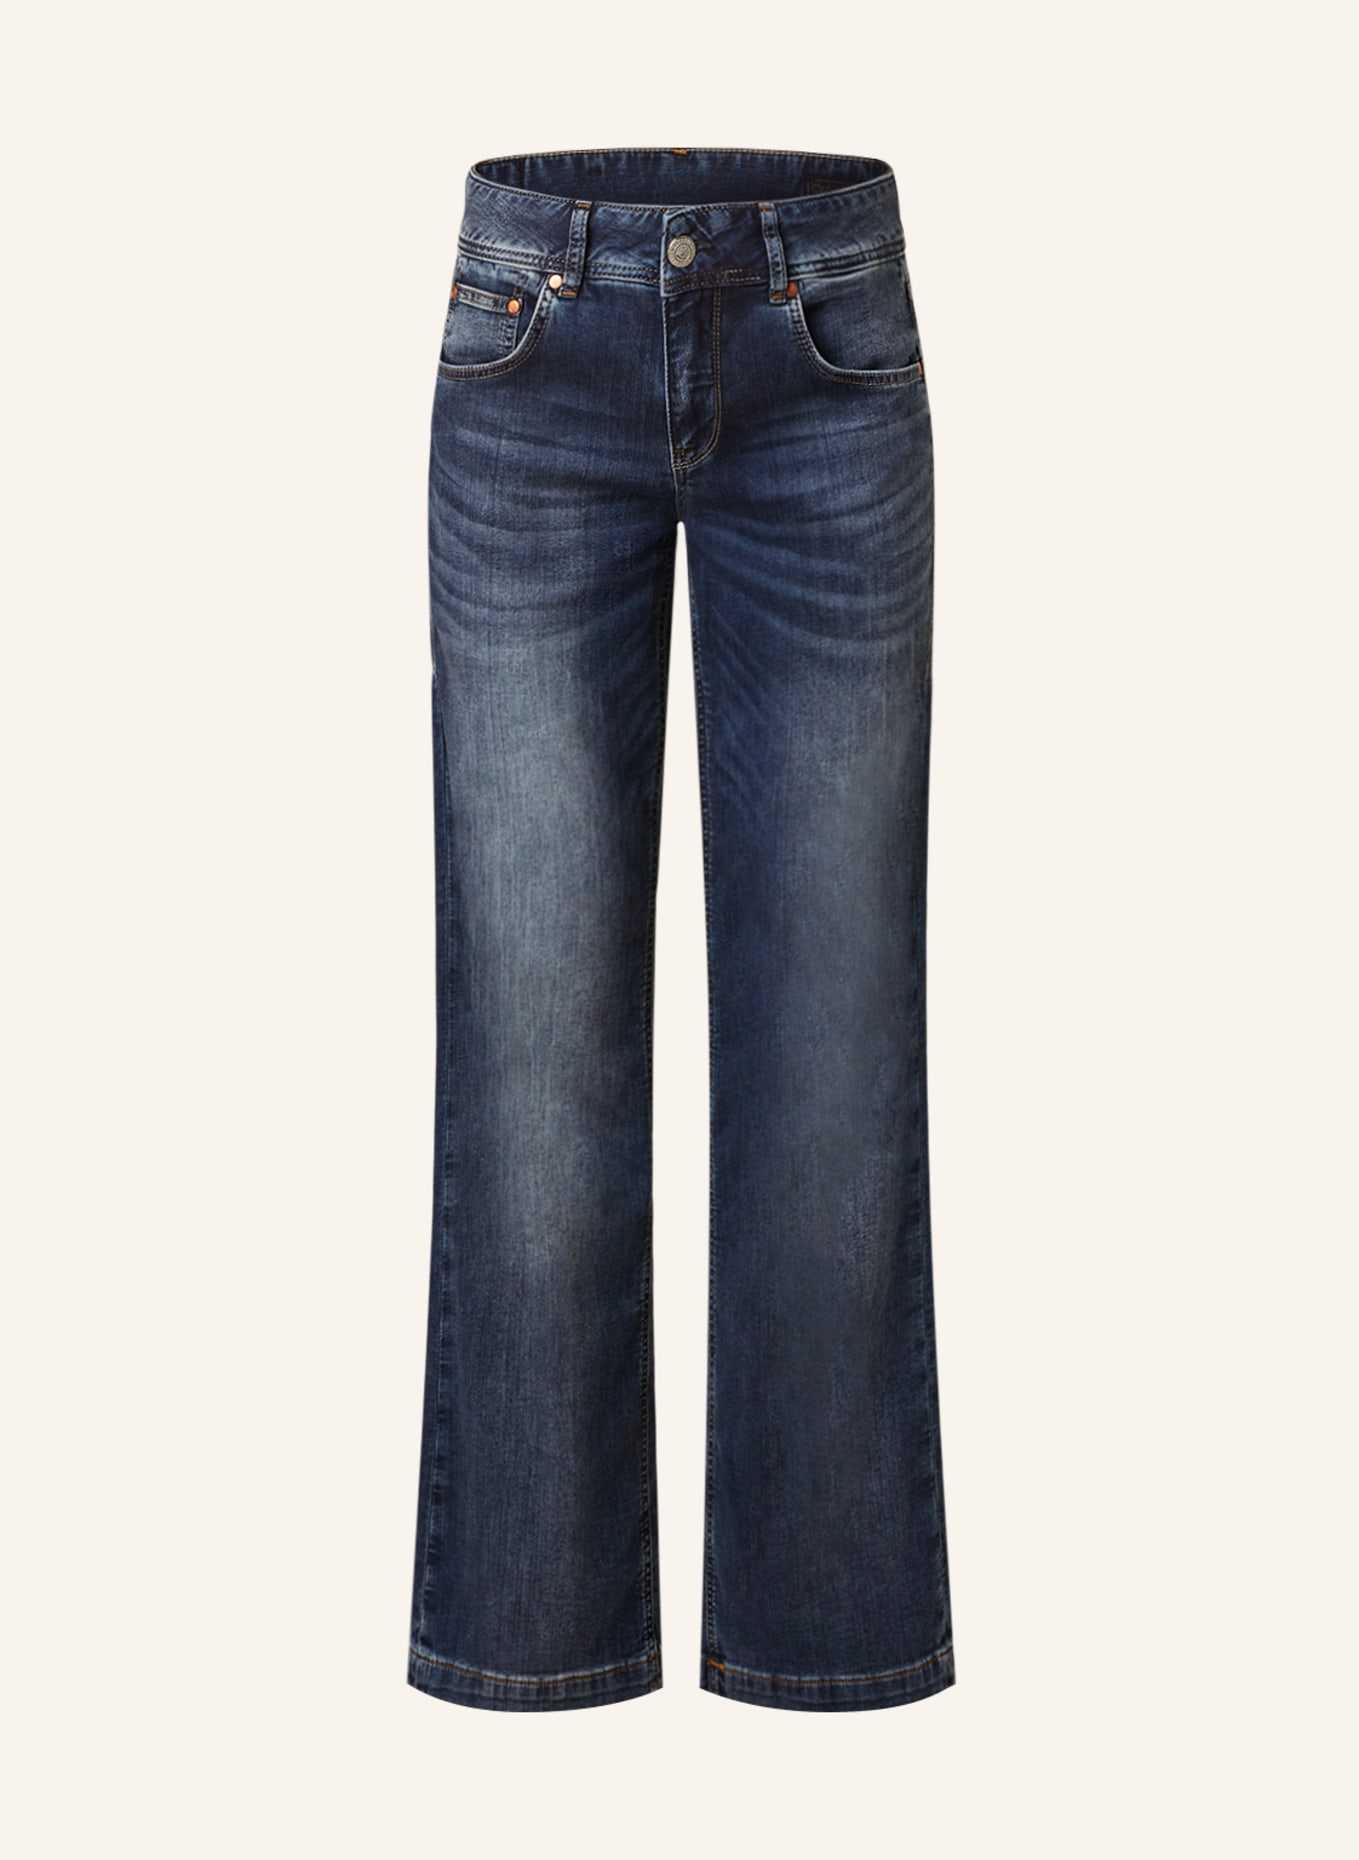 Herrlicher Flared jeans EDNA, Color: 771 releaxed (Image 1)